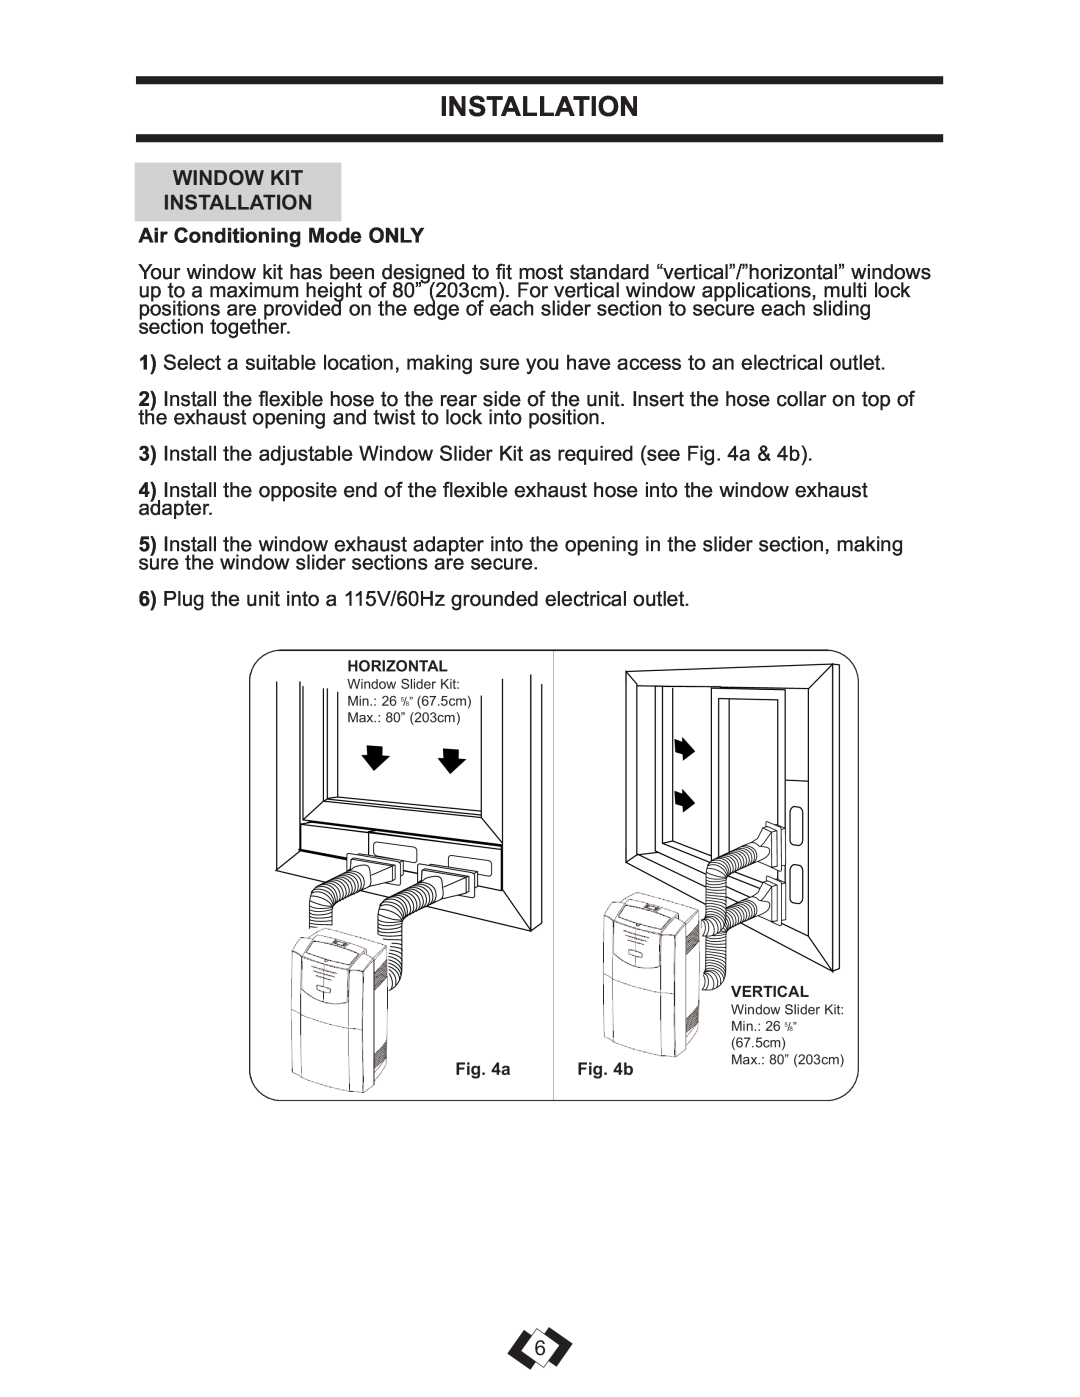 Danby DPAC 13009 operating instructions Window Kit Installation, Air Conditioning Mode ONLY 